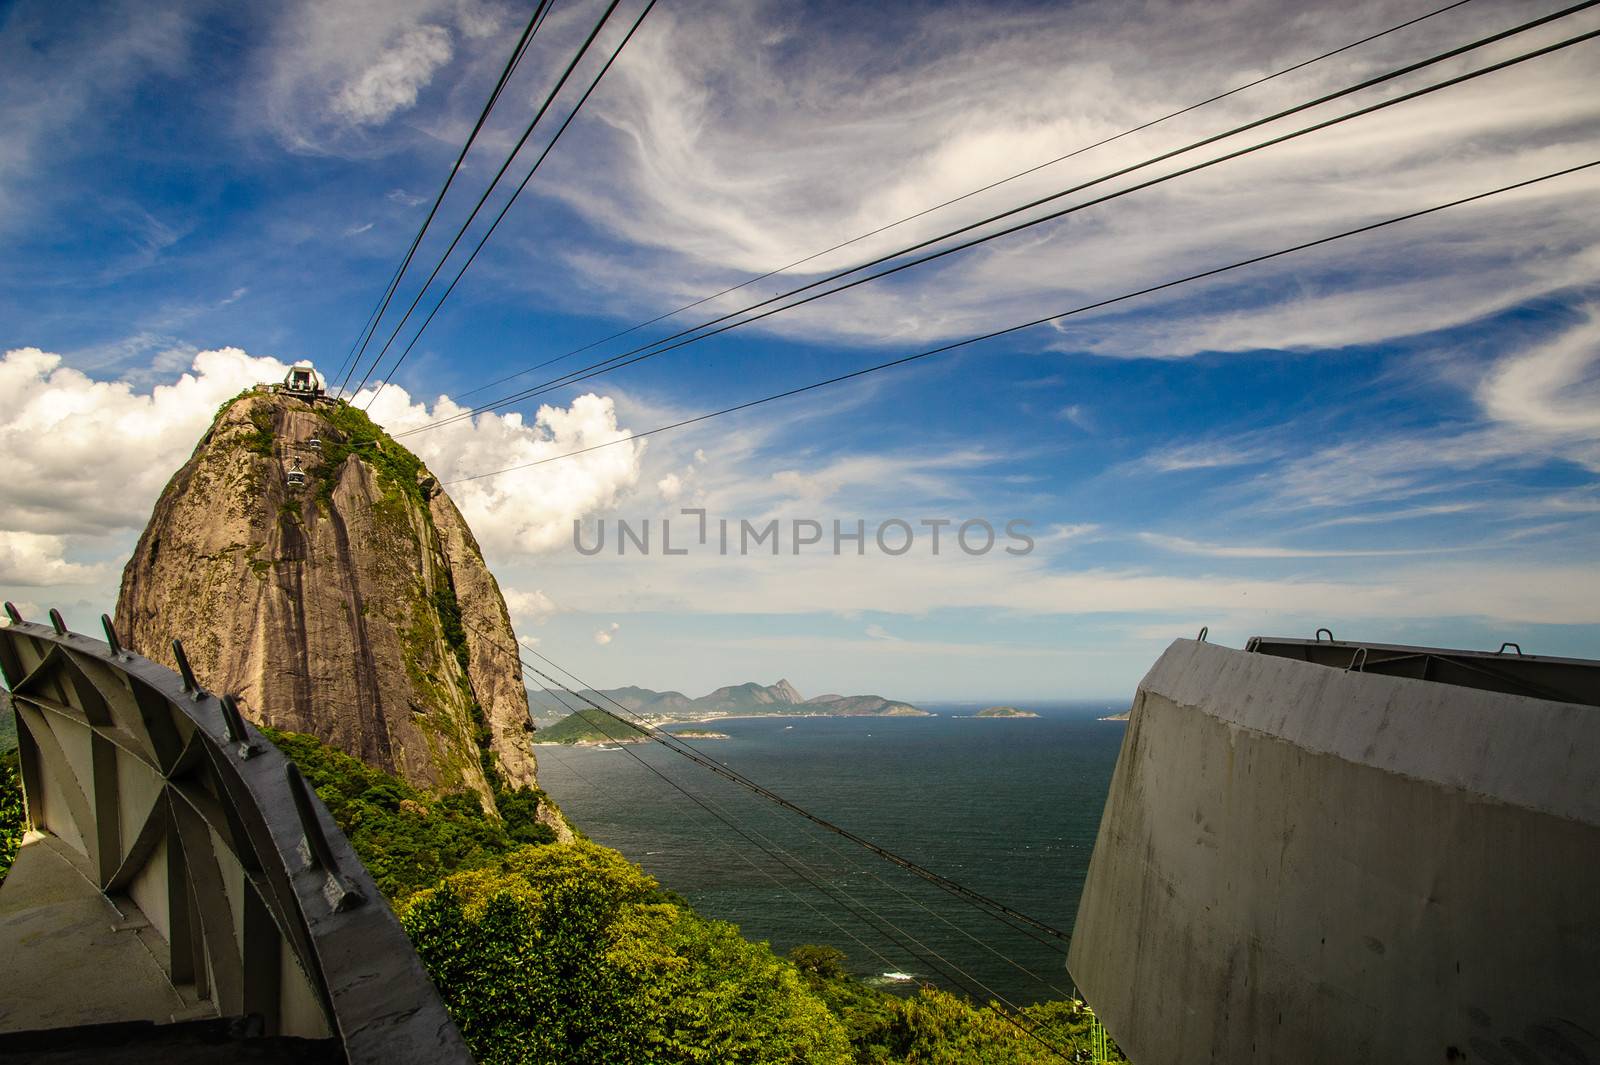 The cableway up to the Sugarloaf Mountain in Rio de Janeiro.